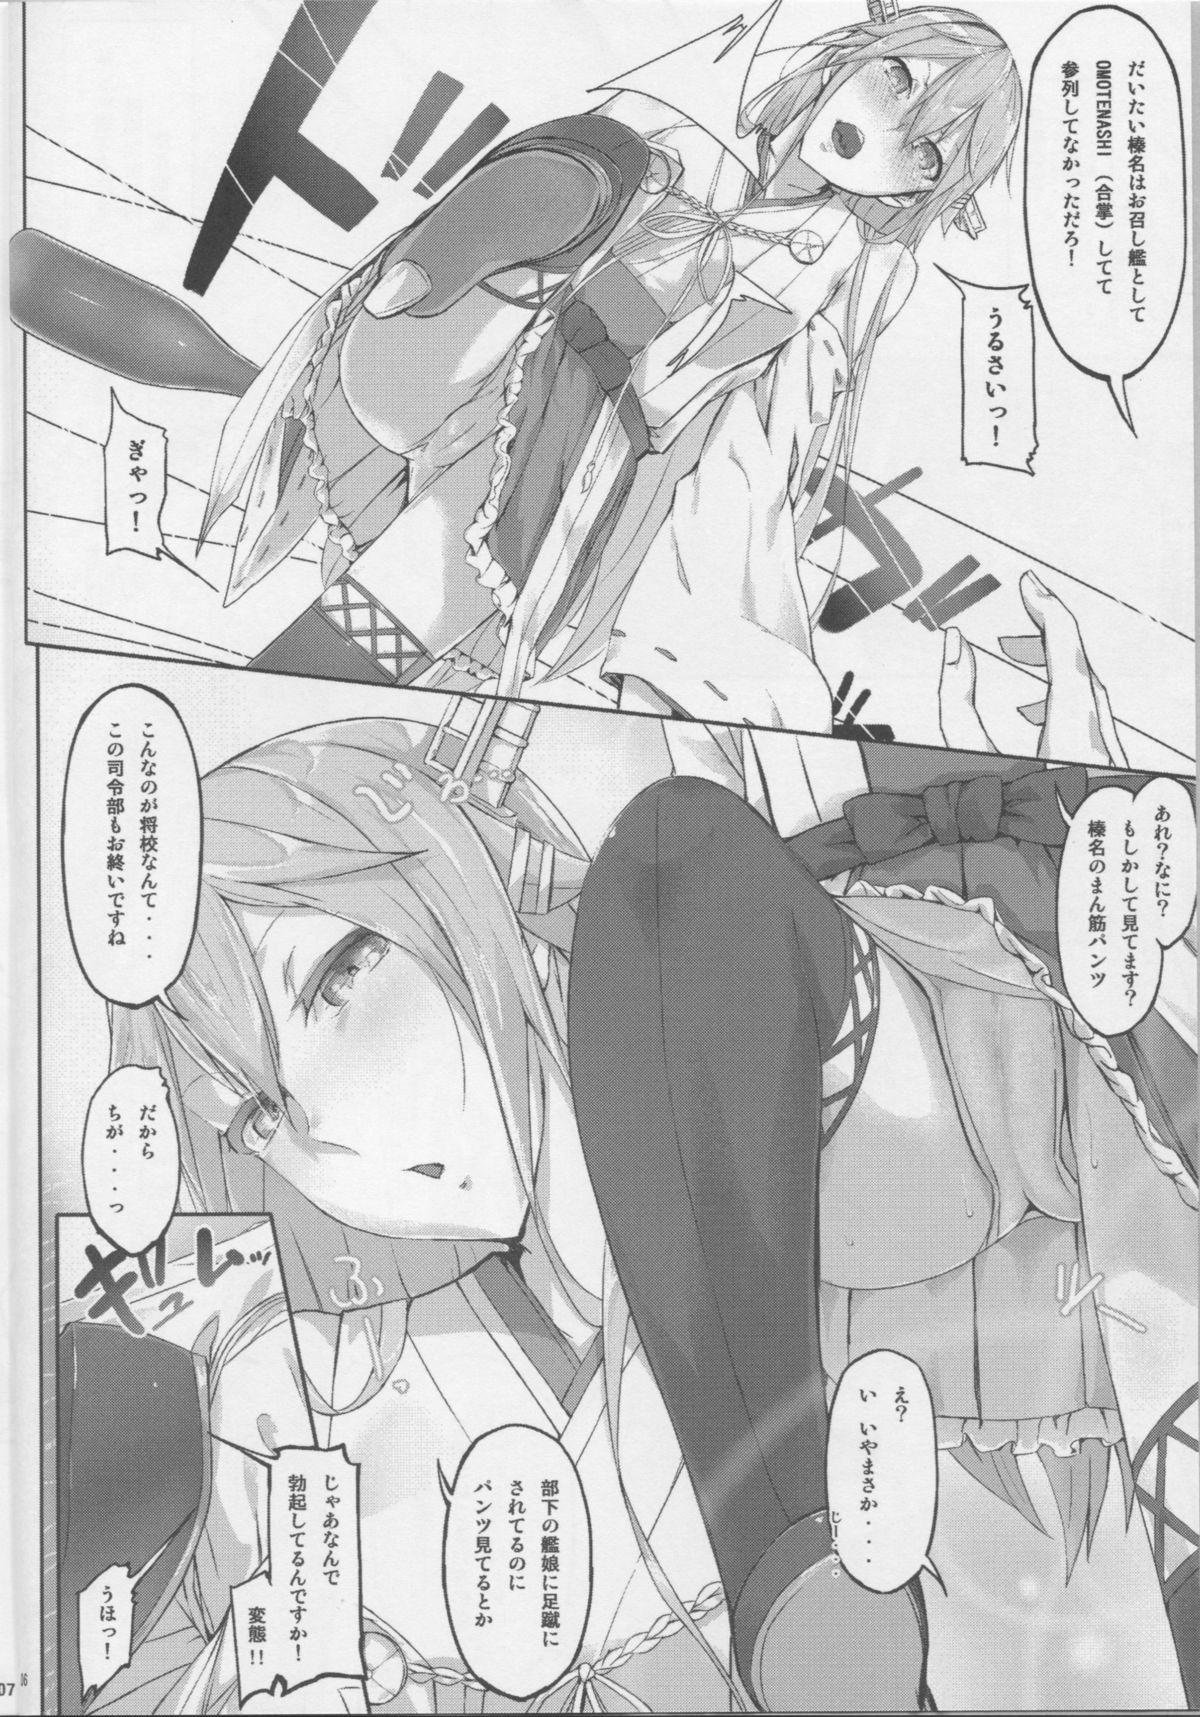 Erotic Fleet Girls Pack vol. 1 - Kantai collection Tiny - Page 5